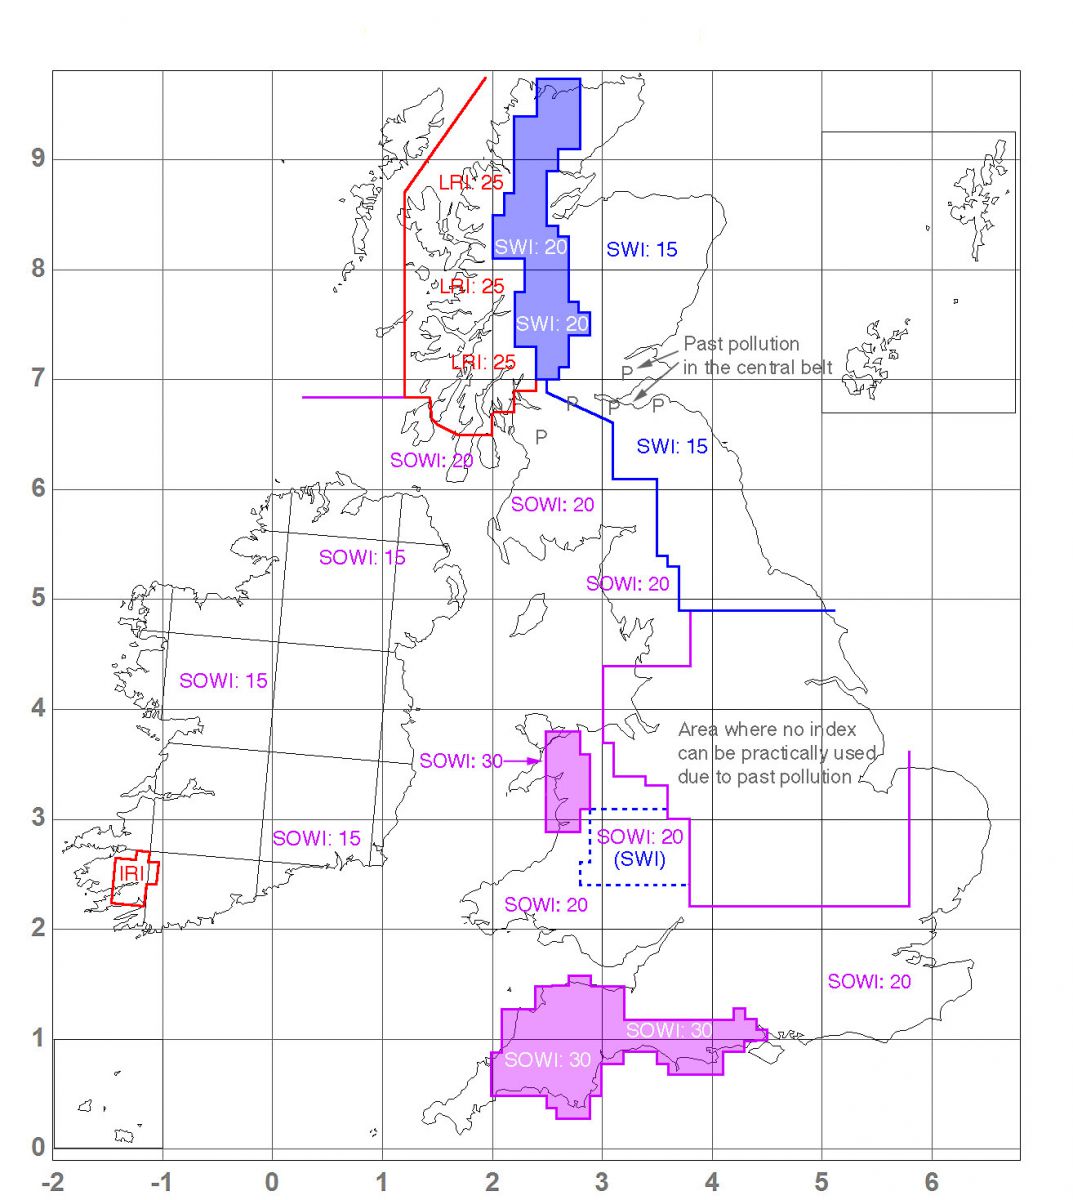 Map showing areas where each lichen index for lowland/temperate woodlands is appropriate